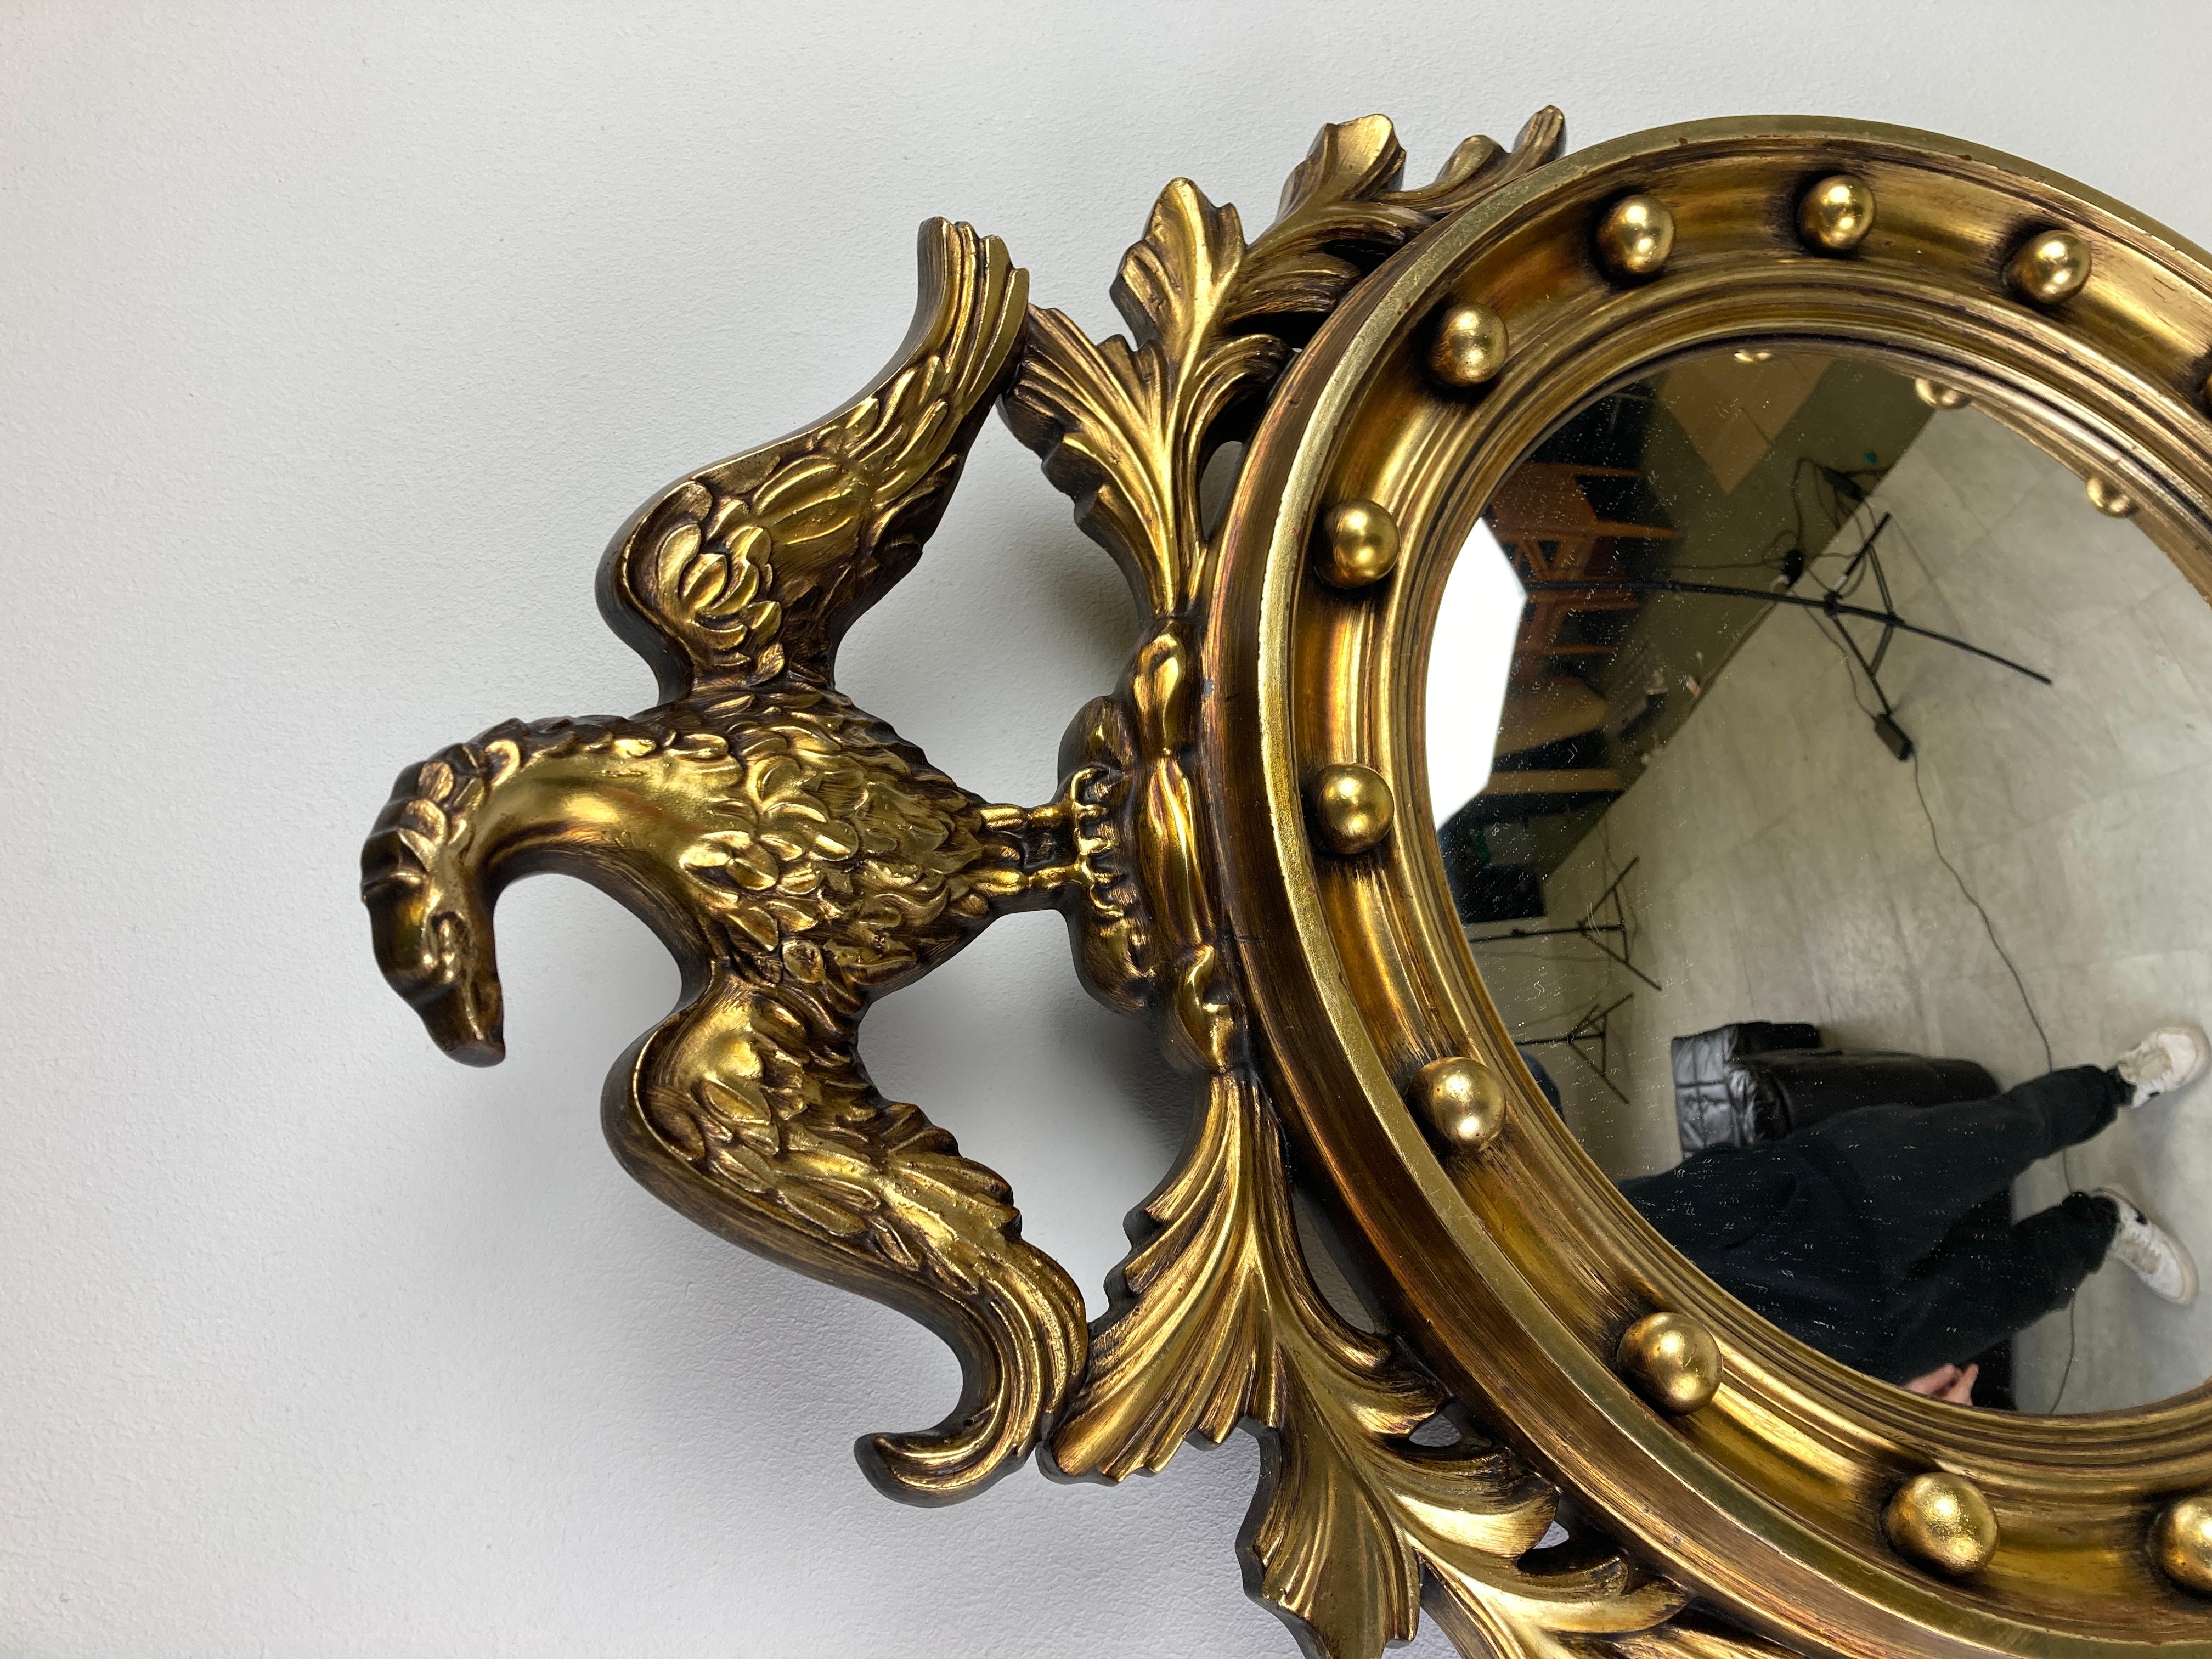 Gilded resin convex mirror with an eagle - sometimes referred to as 'butler' mirror or 'witch eye' mirror.

The golden mirror is in a very good condition.

Beautiful eye catching mirror, ideal to add to a collection of sunburst mirrors.

1960s